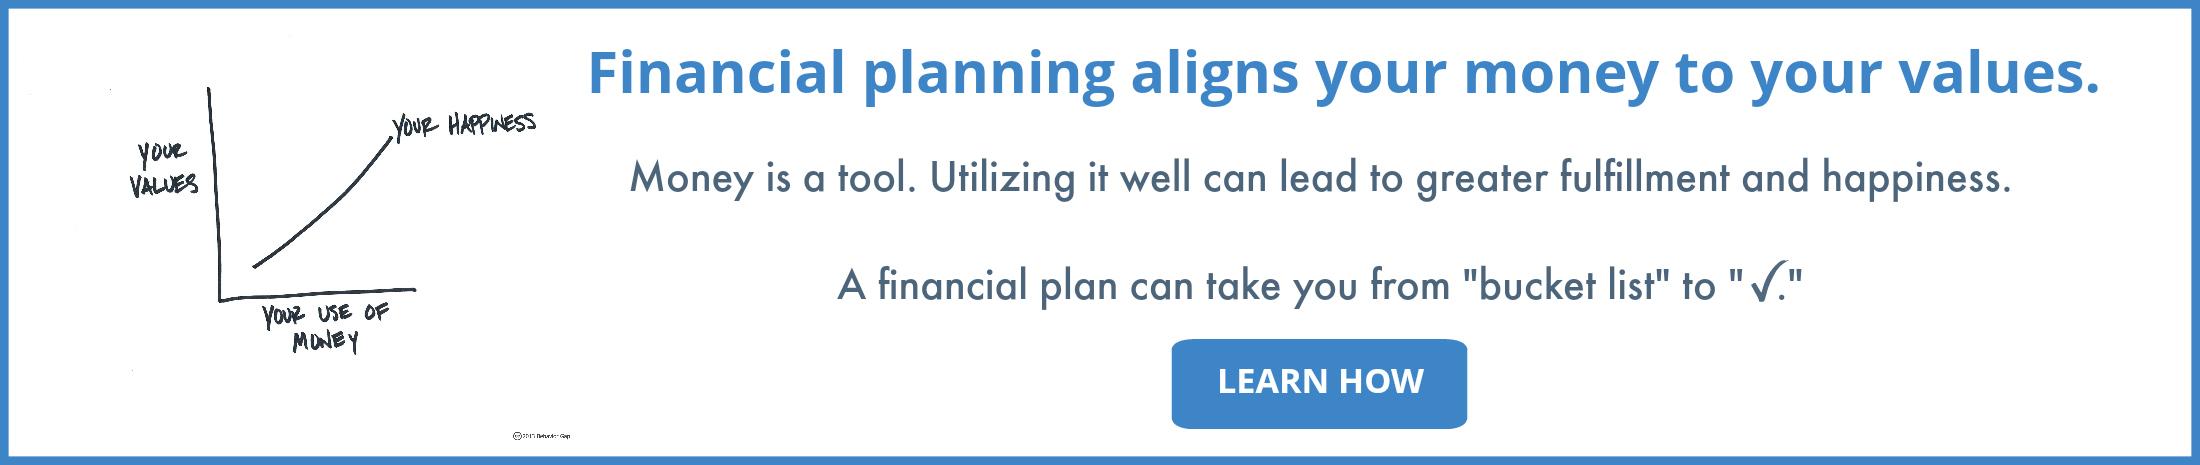 Azimuth Wealth Management Why Financial Planning banner